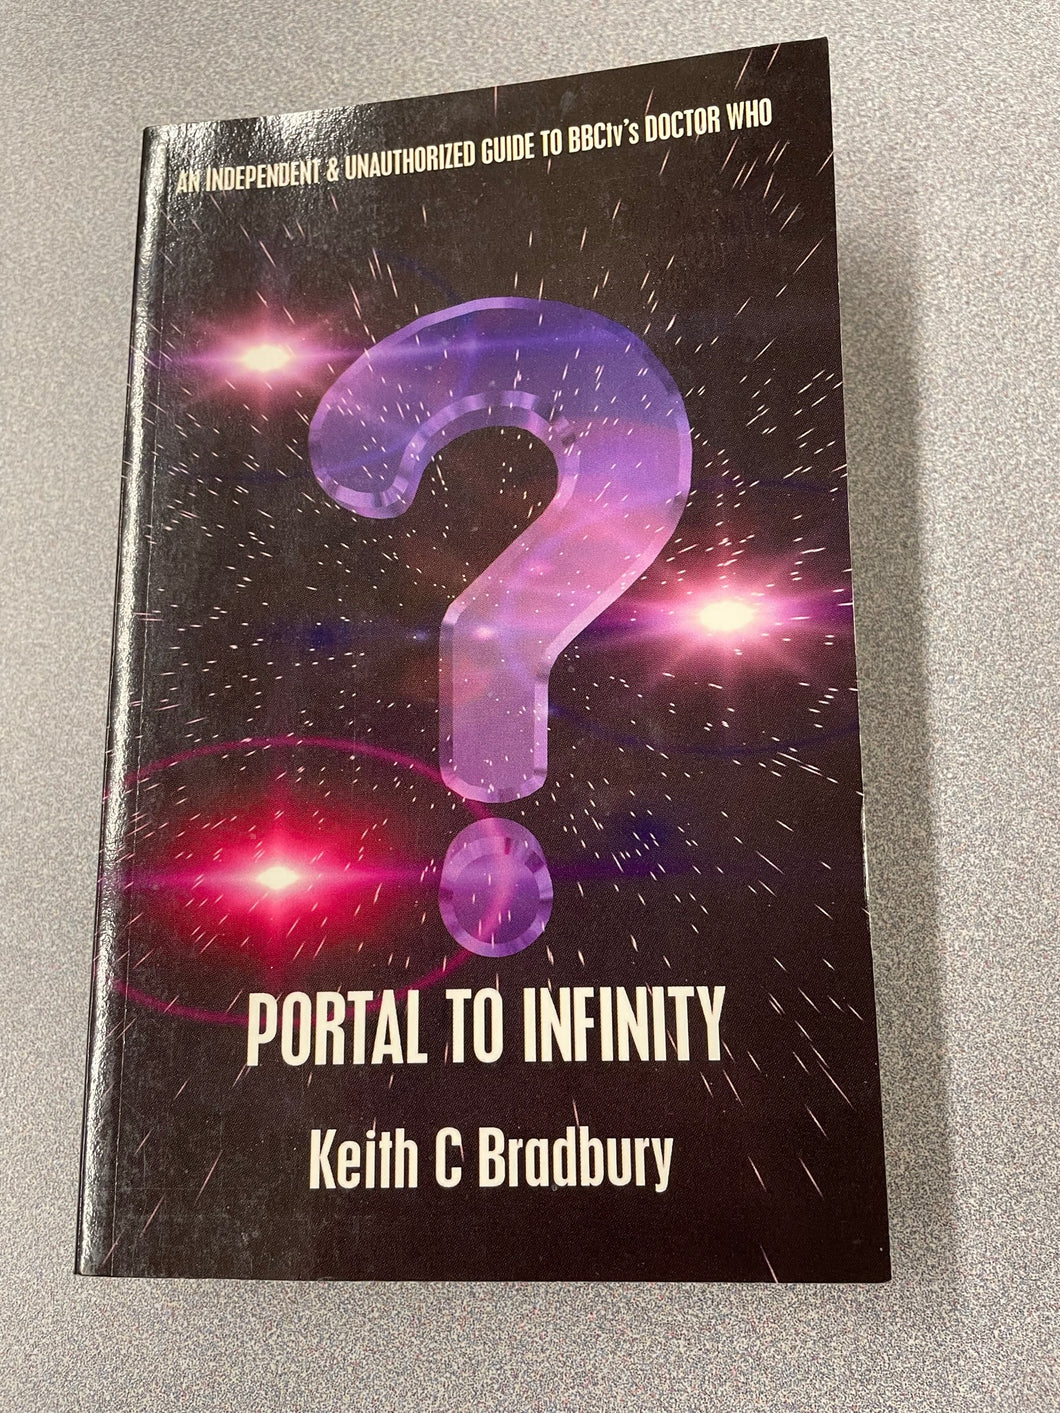 Portal to Infinity: An Independent & Unauthorized Guide to BBCtv's Doctor Who, Bradbury , Keith C. [2004] SF 2/23